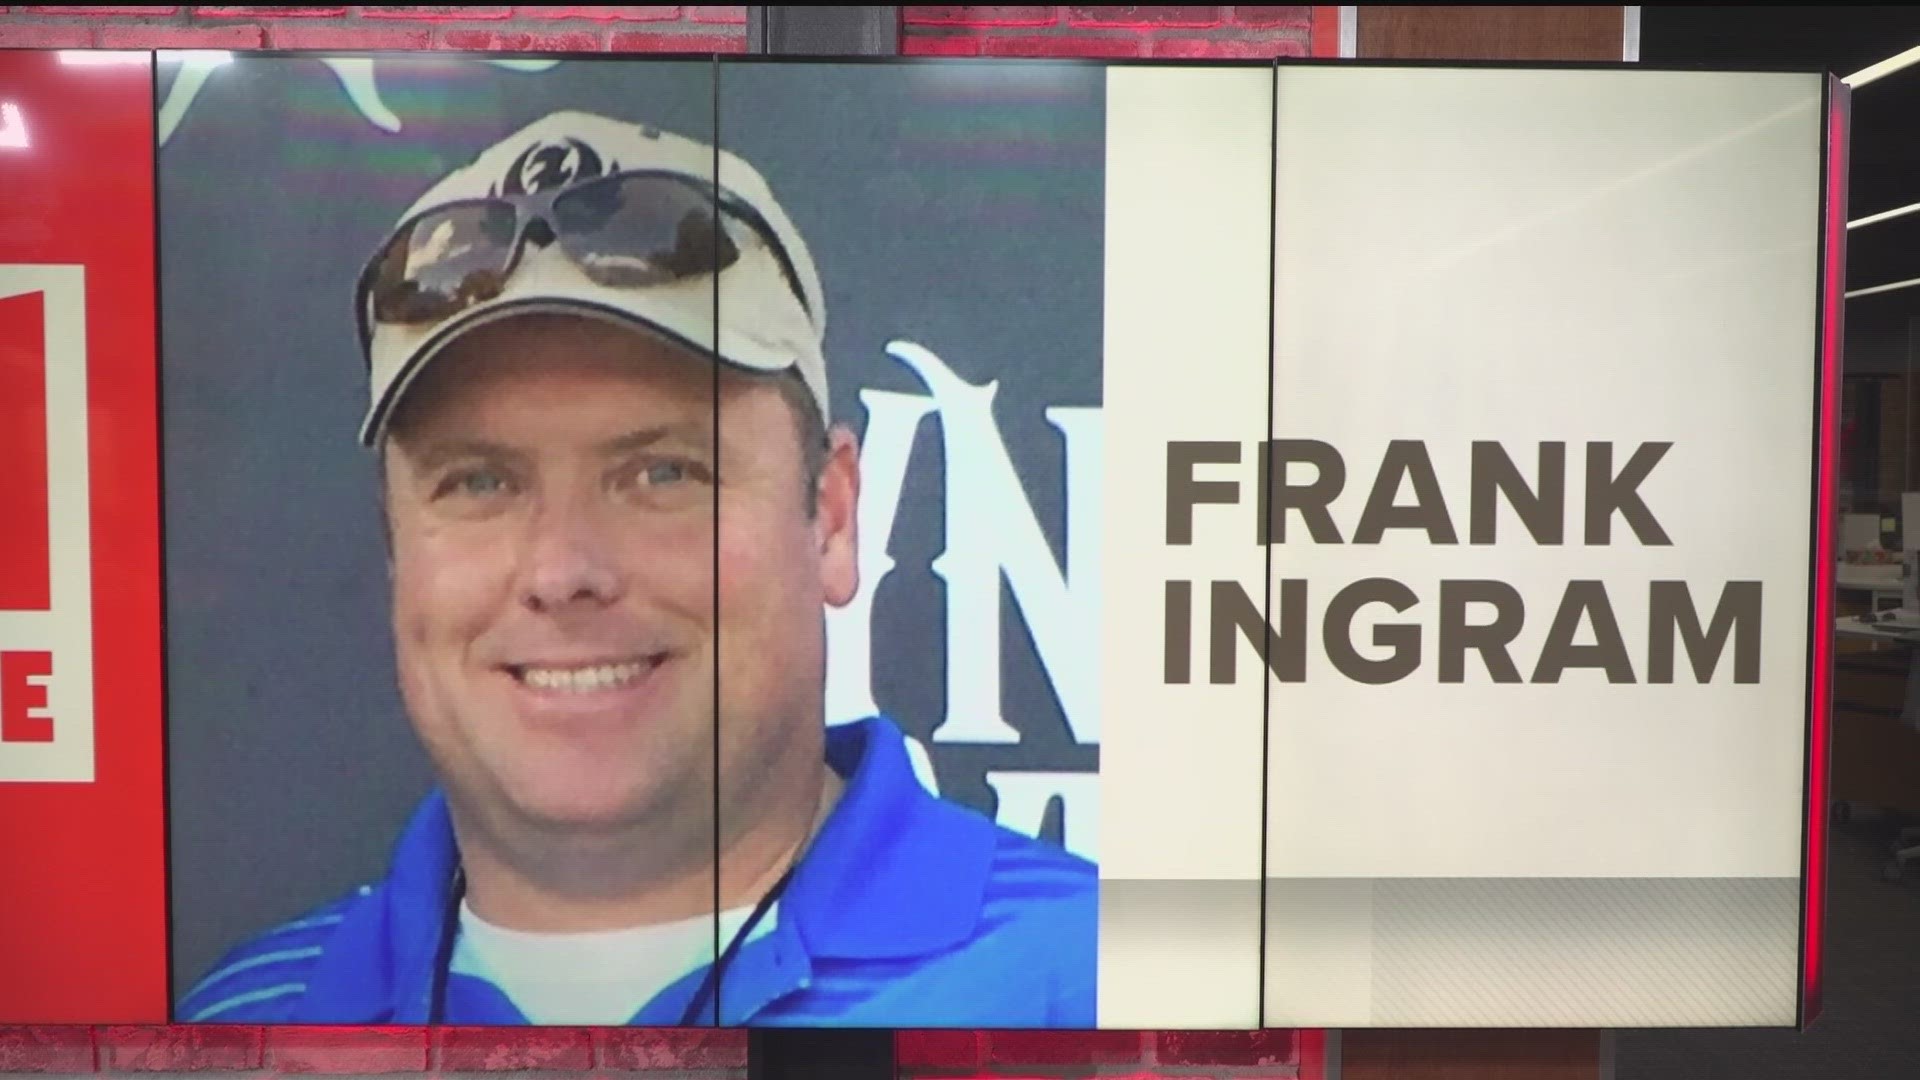 Frank Ingram, owner of  Ingram Towing and Impounding in Woodstock, was hit and killed on the job Thursday.